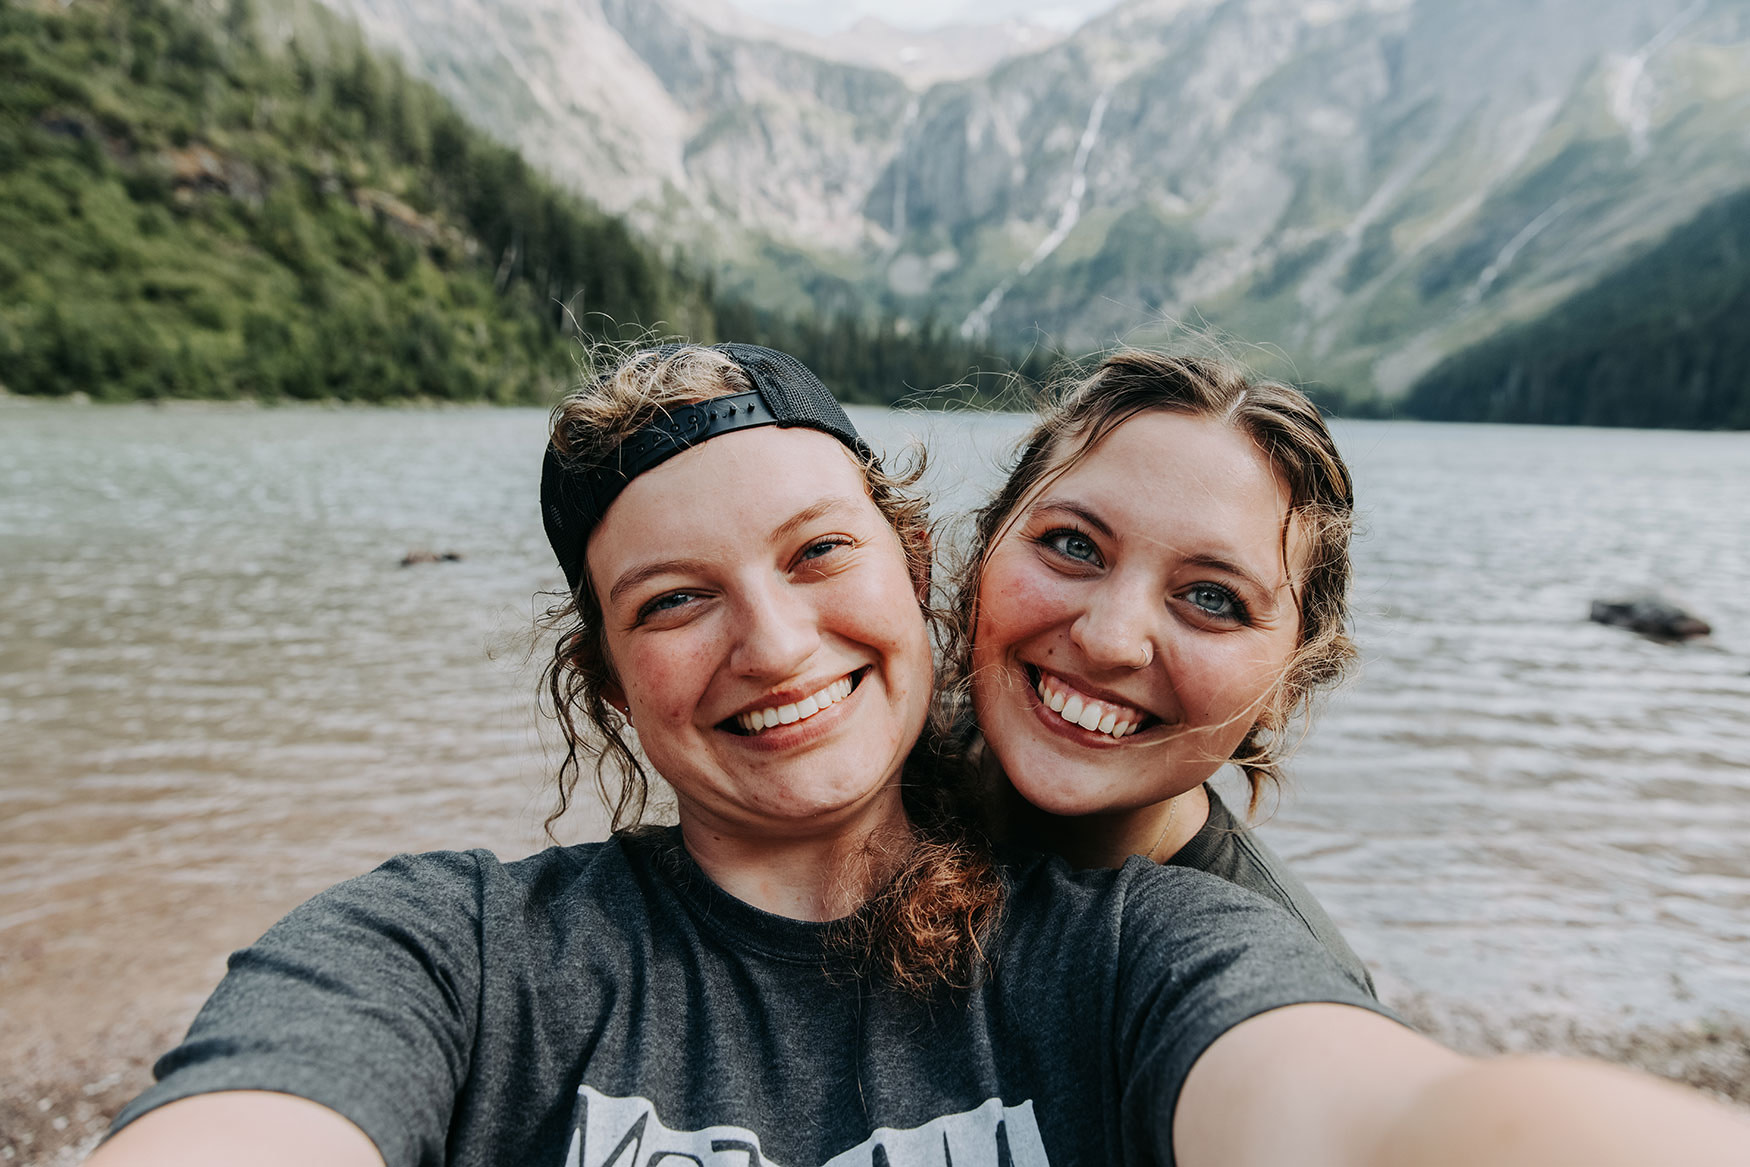 Two girls posting for selfie by a lake and mountains.